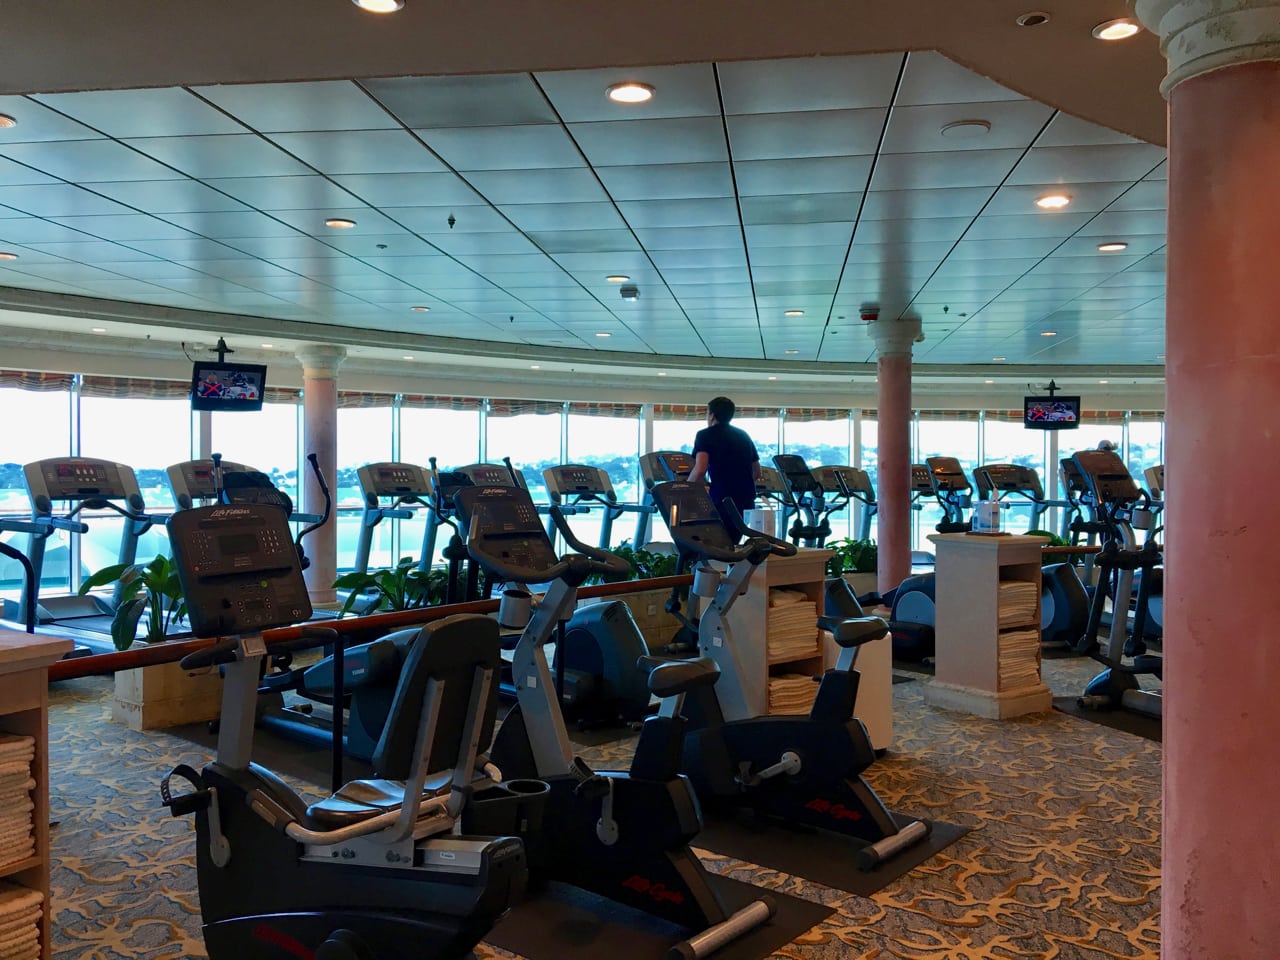 There are plenty of ways to enjoy the onboard gym.